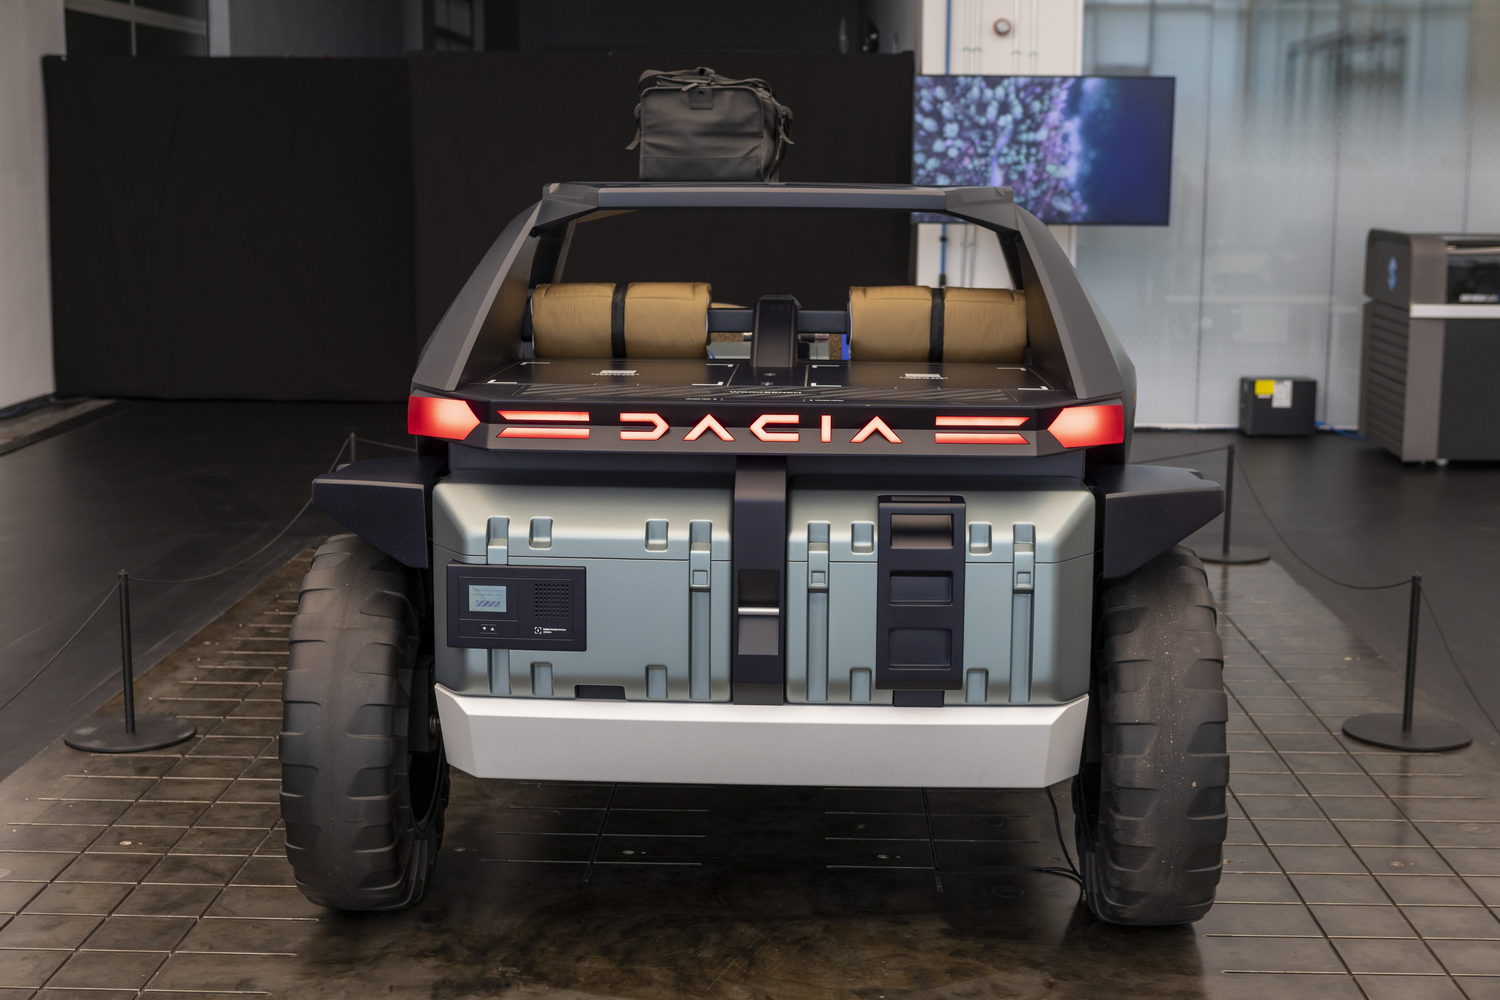 How will Dacia design cars to be affordable?